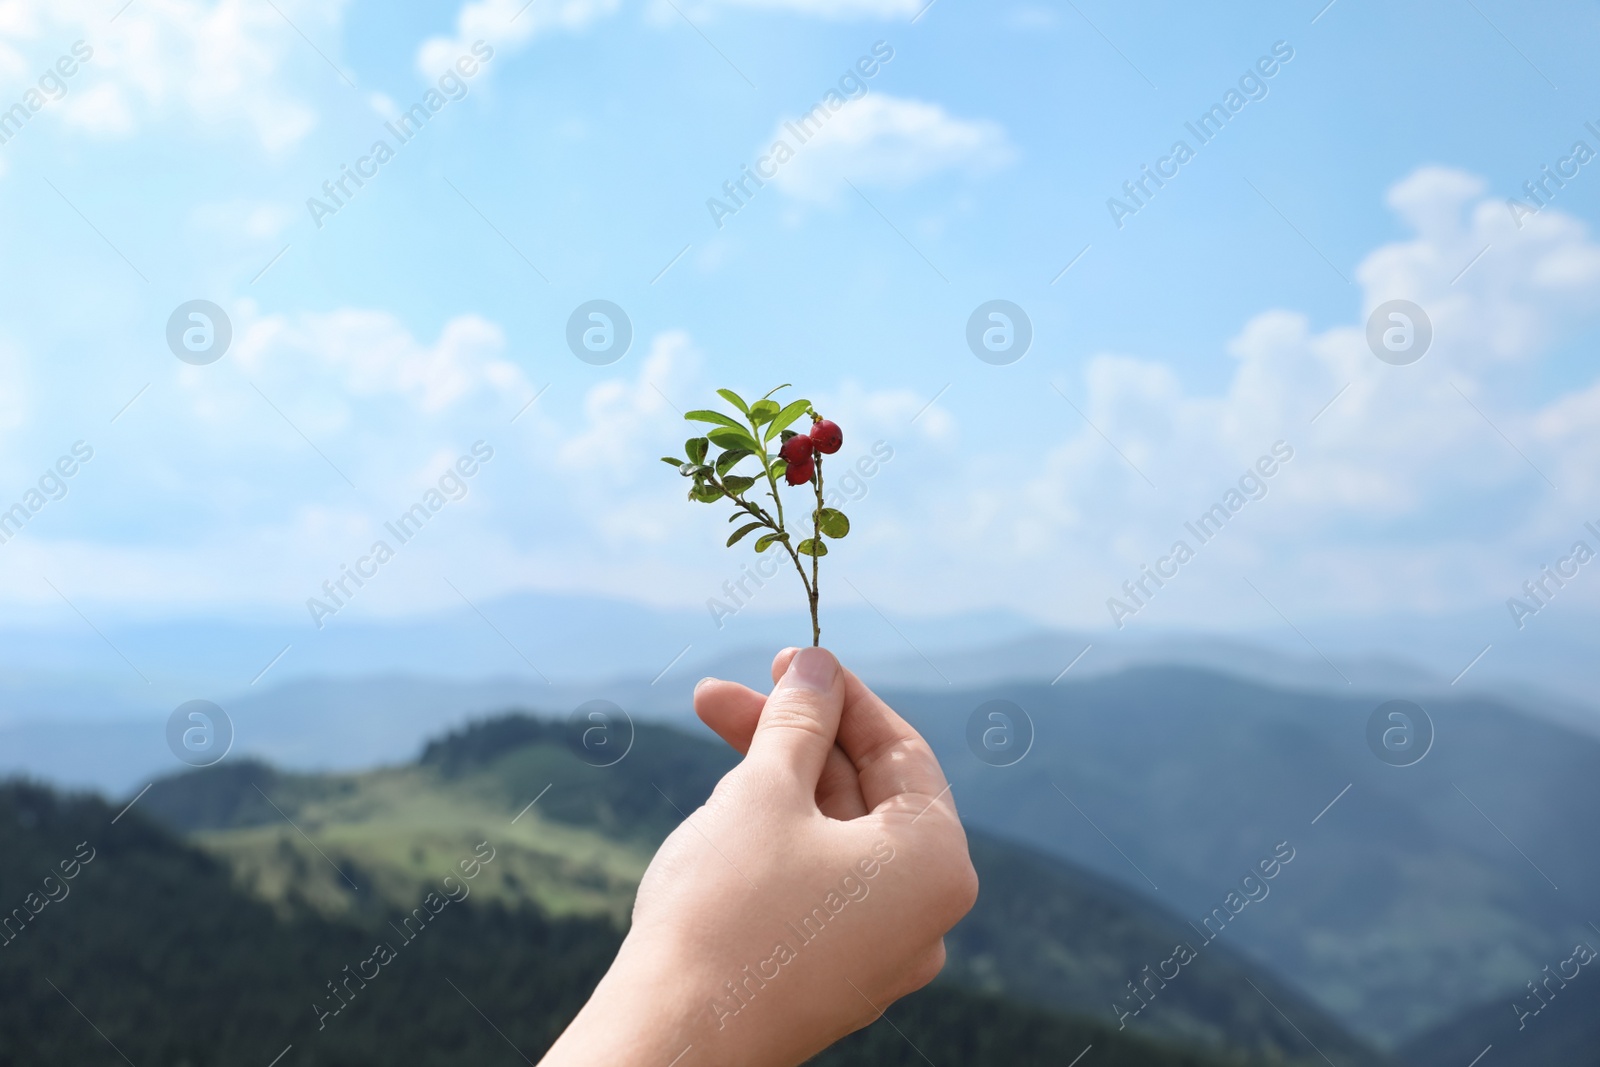 Photo of Woman holding twig with wild berries in mountains, focus on hand